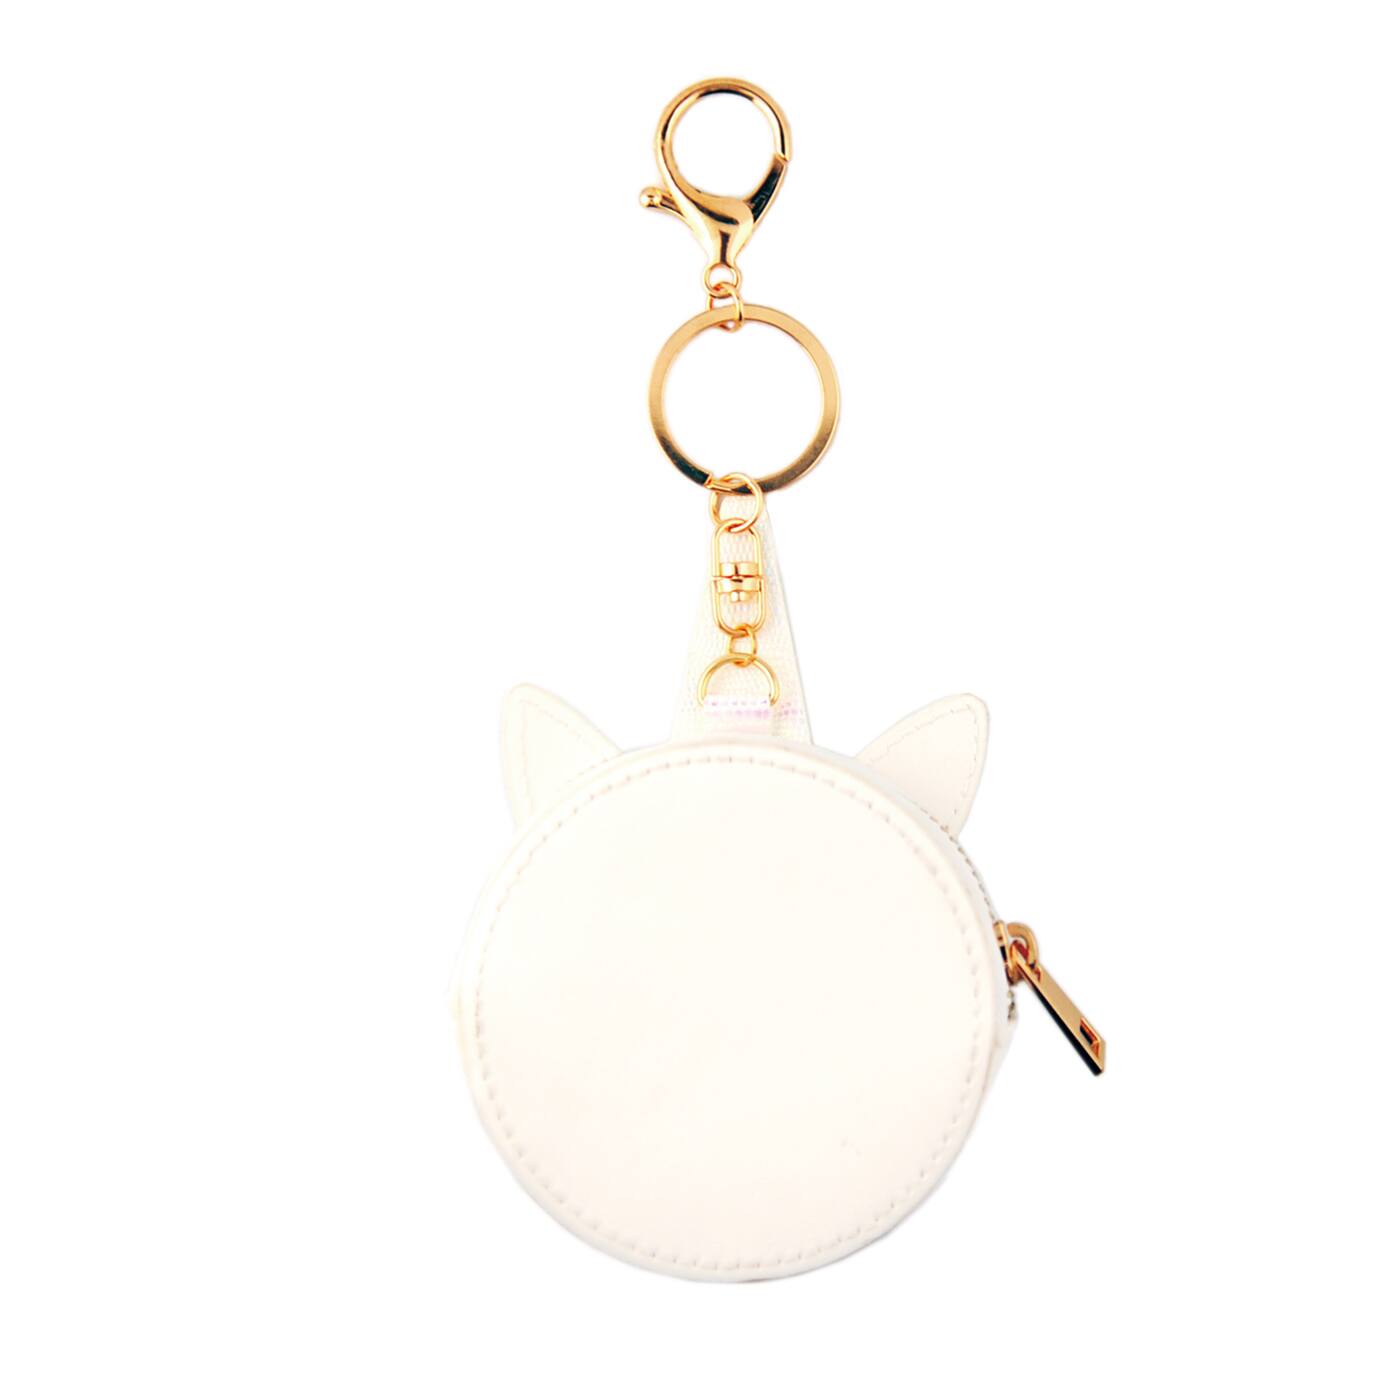 Buy the Unicorn Coin Purse Keychain By Bead Landing™ at Michaels